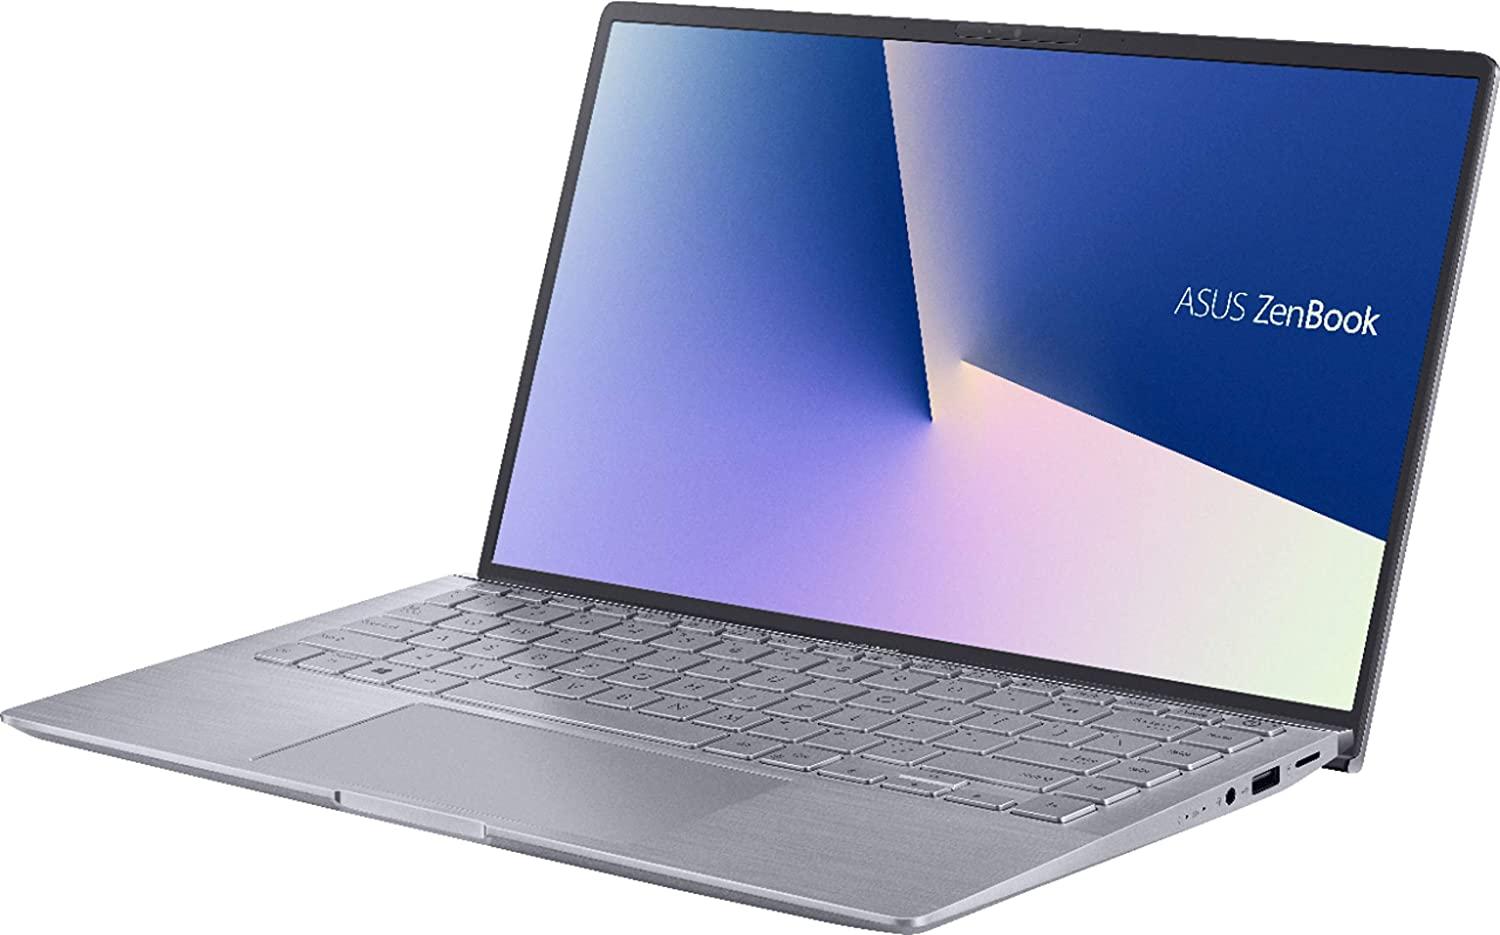 ASUS ZenBook 14in Ryzen 5 8GB 256GB Notebook Laptop for $494.99 Shipped